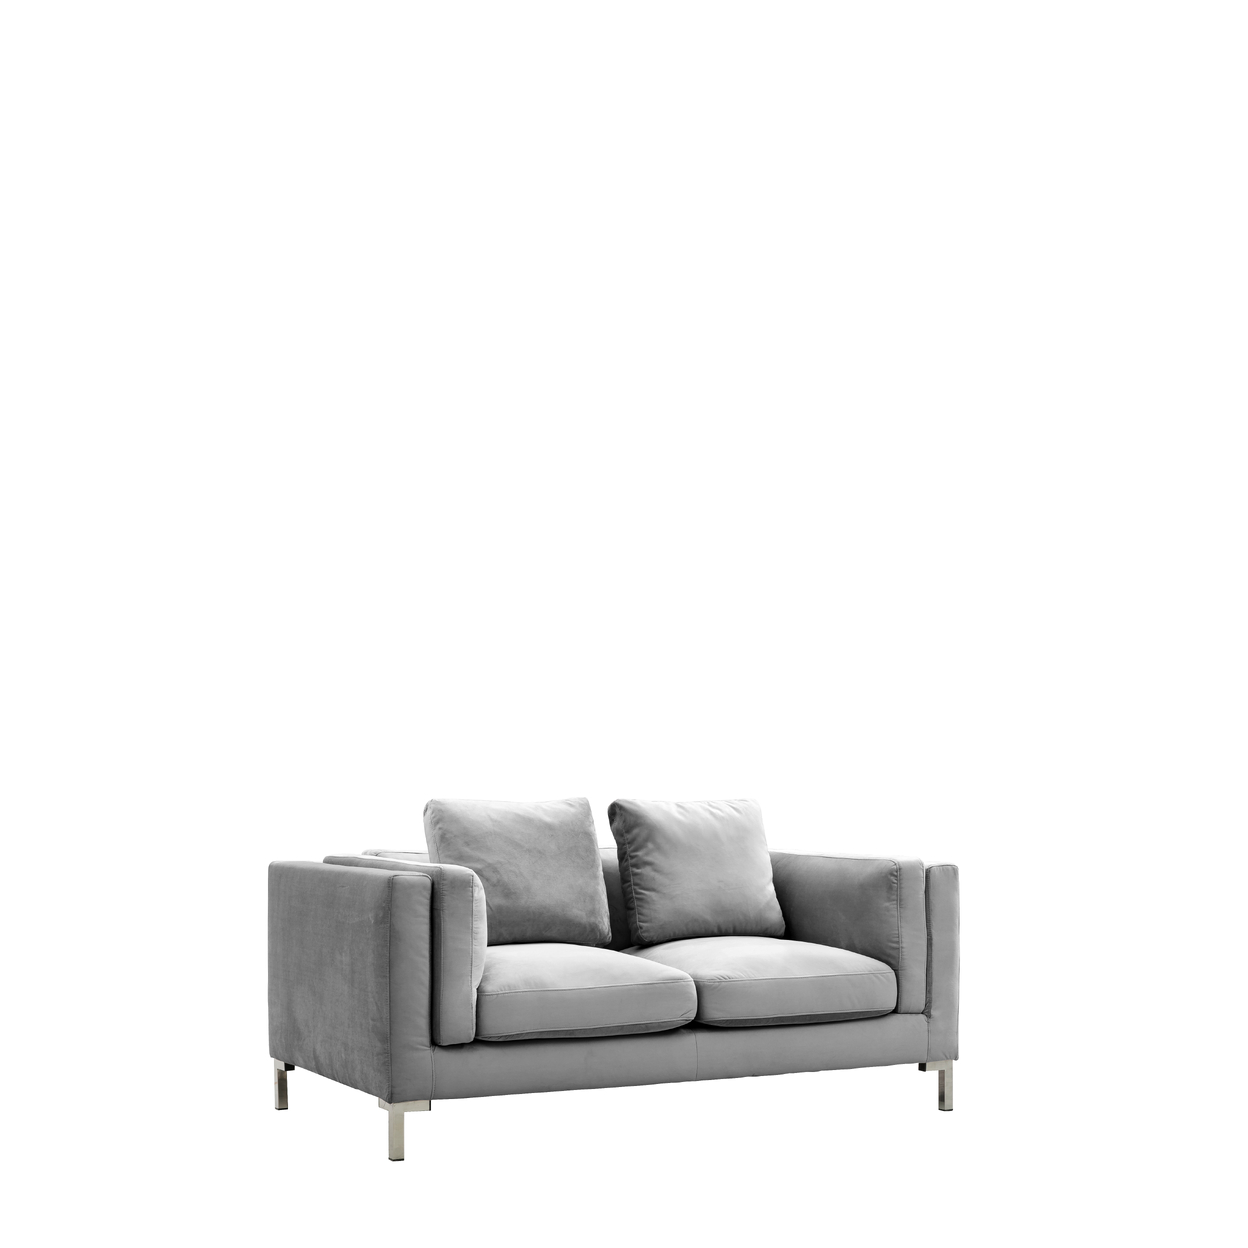 Iconic Home Everlie Loveseat Velvet Upholstered Multi-Cushion Seat Loose Back Shelter Arm Design Silver Tone Metal Y-Legs - Taupe